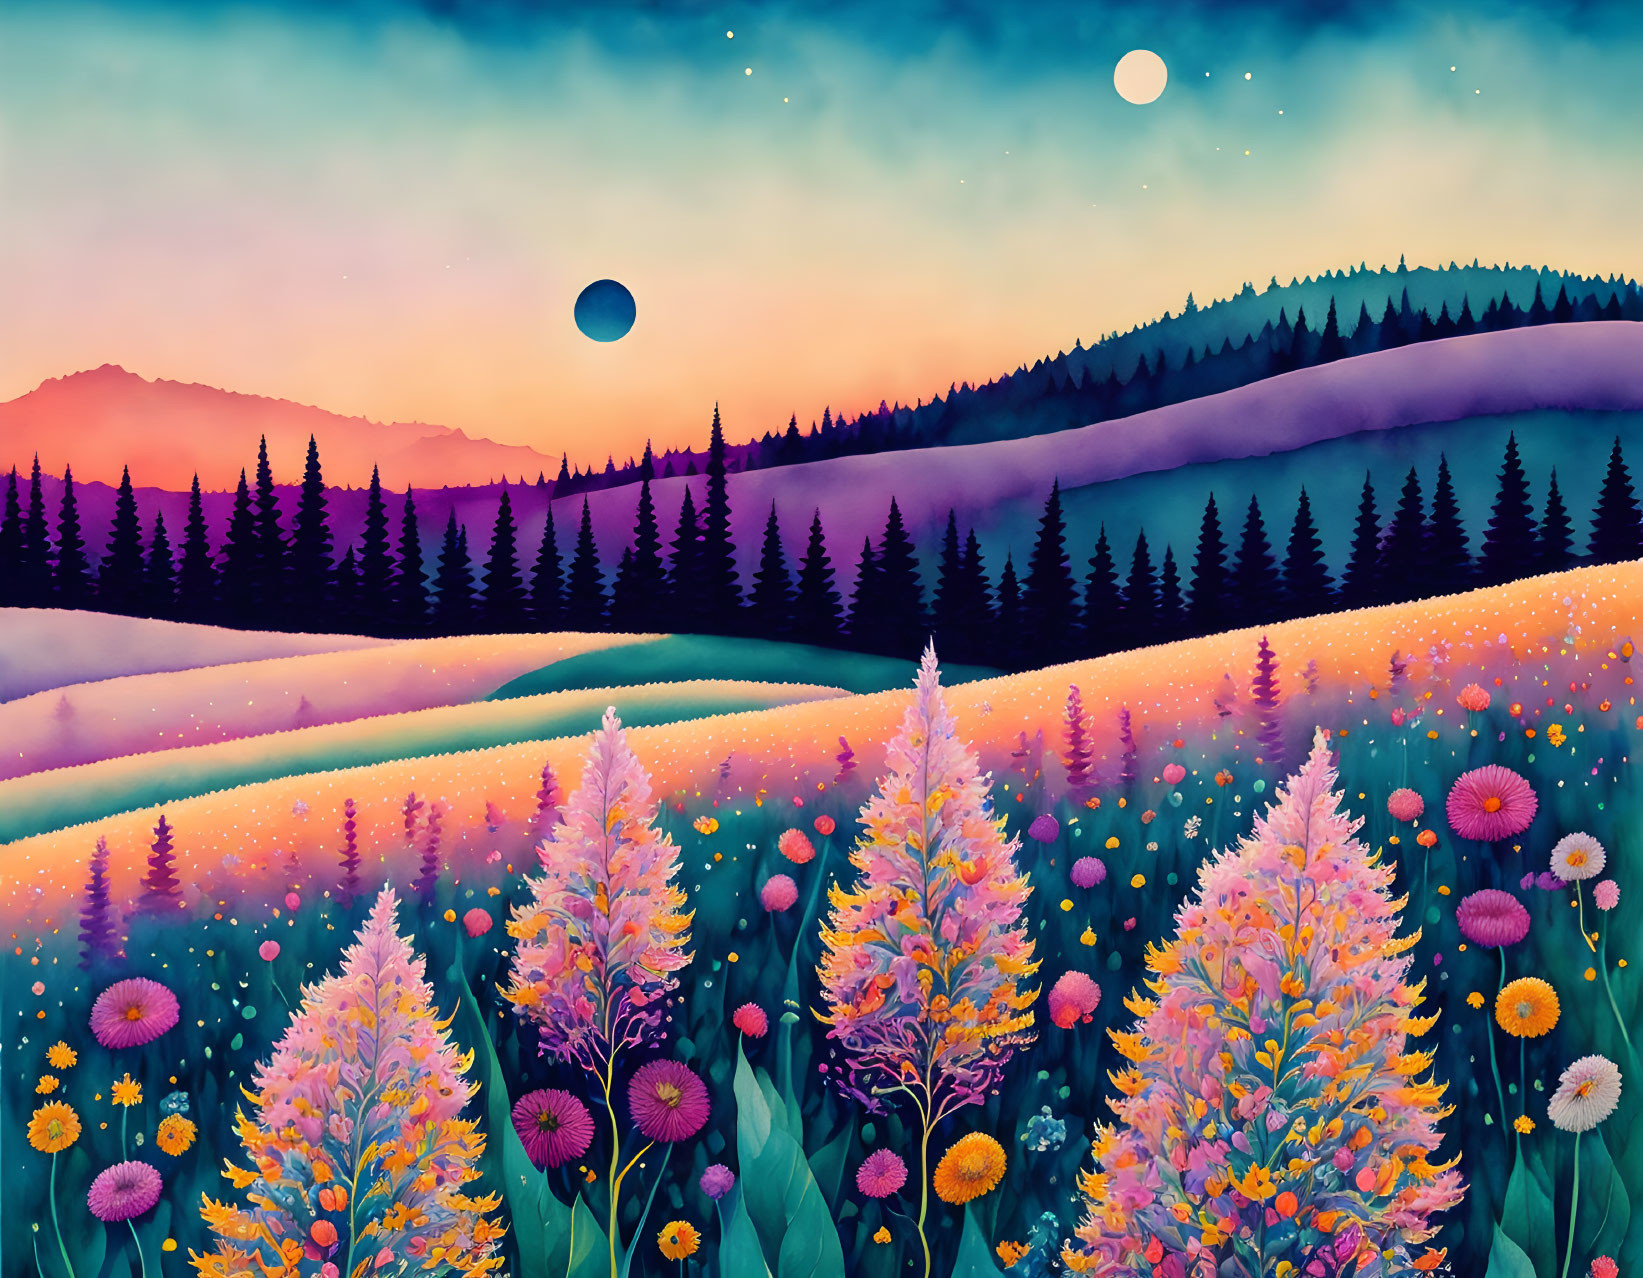 Twilight landscape with purple flowers, hills, forests, mountains, and dual moons